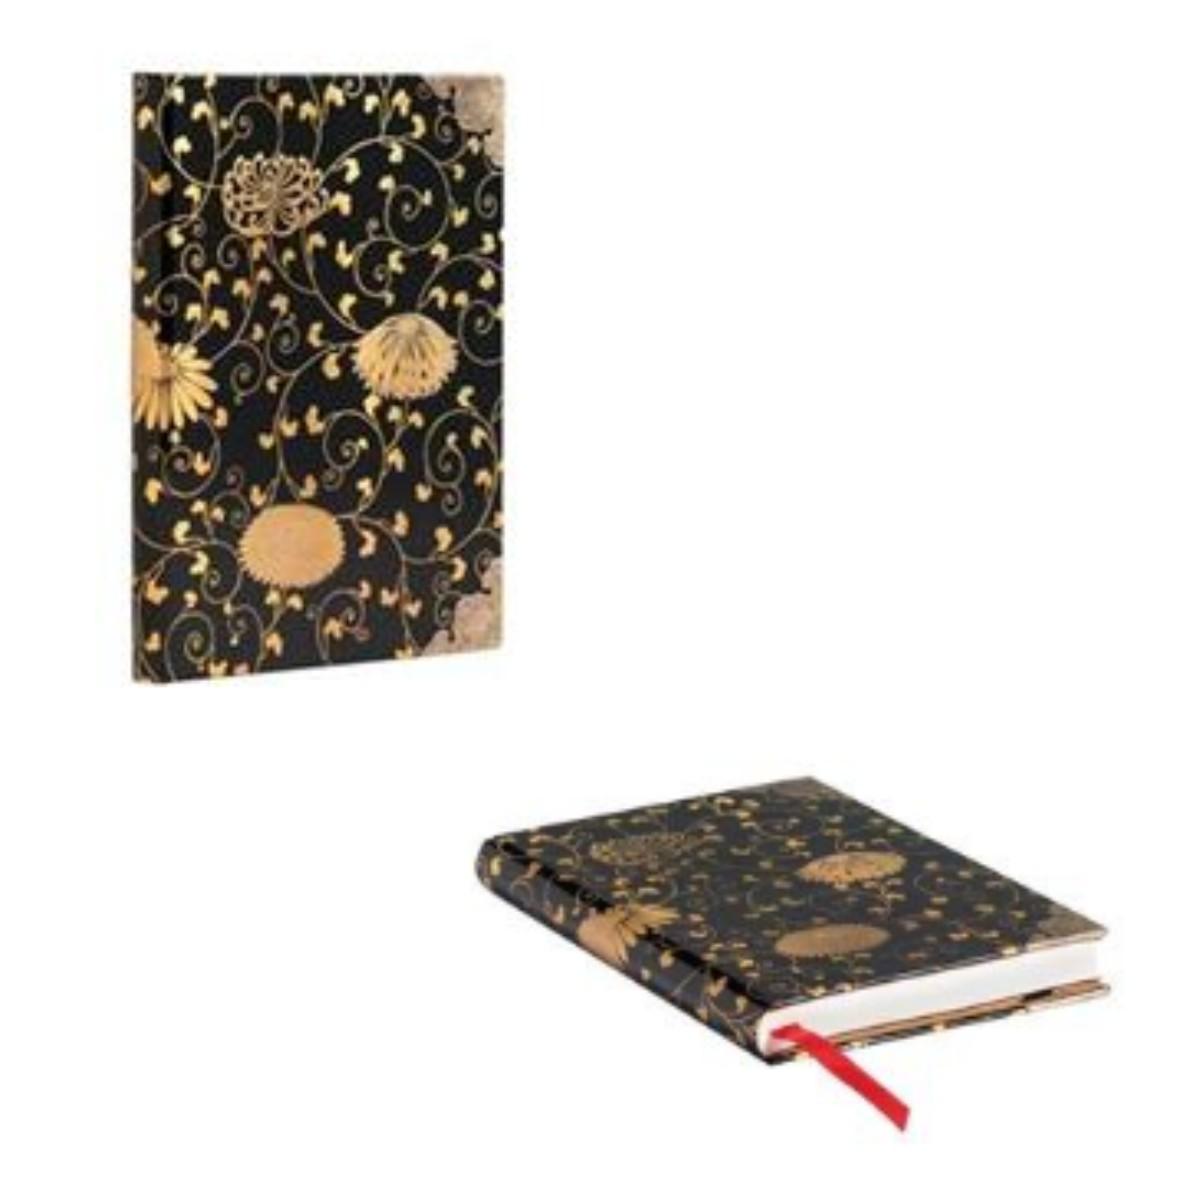 paperblanks Taccuino paperblanks scatole giaponesi laccate